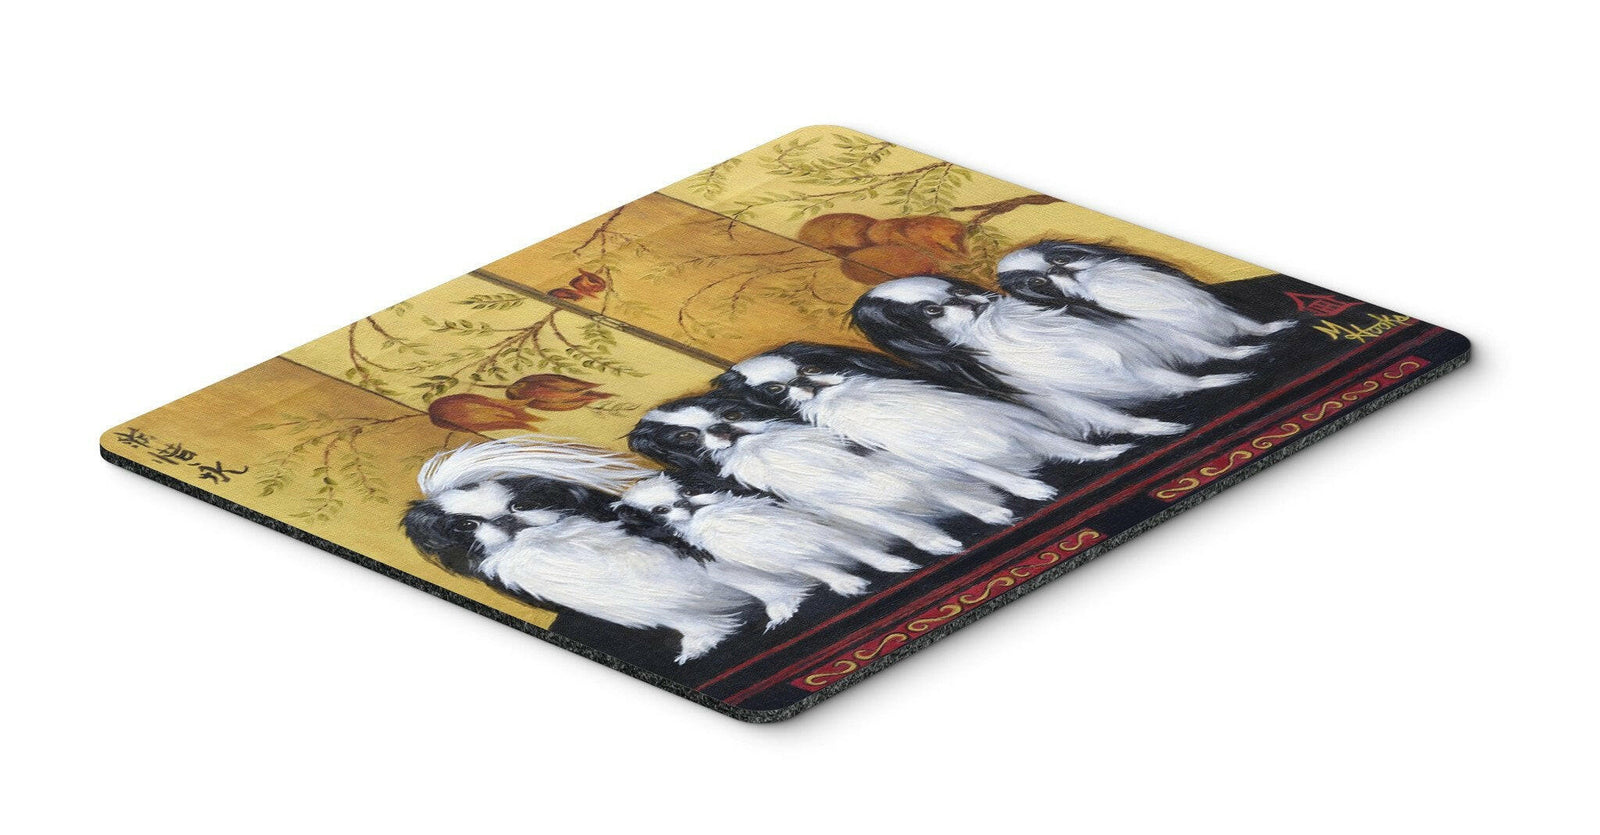 Japanese Chin Tea House Mouse Pad, Hot Pad or Trivet MH1060MP by Caroline's Treasures